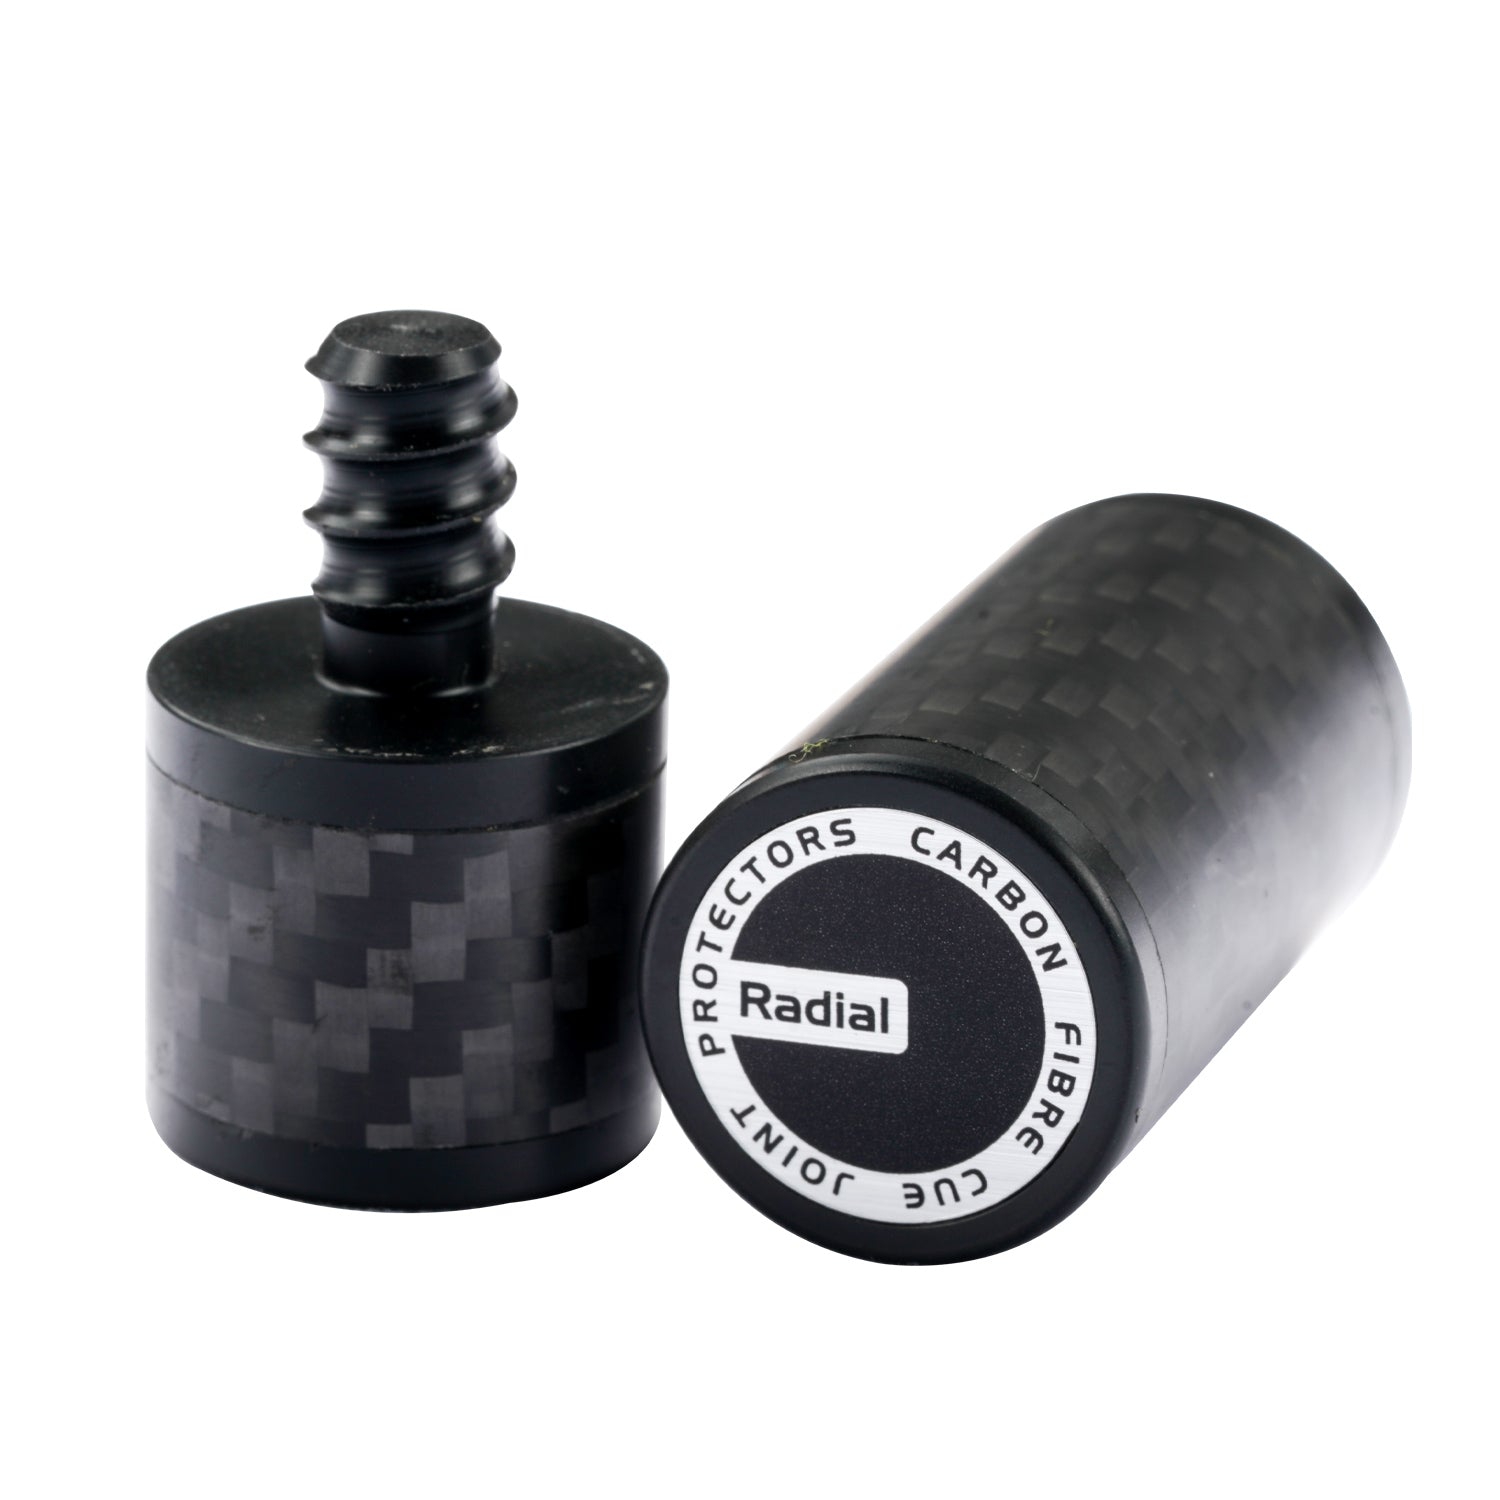 3/8*8 Radial Carbon Joint Protector